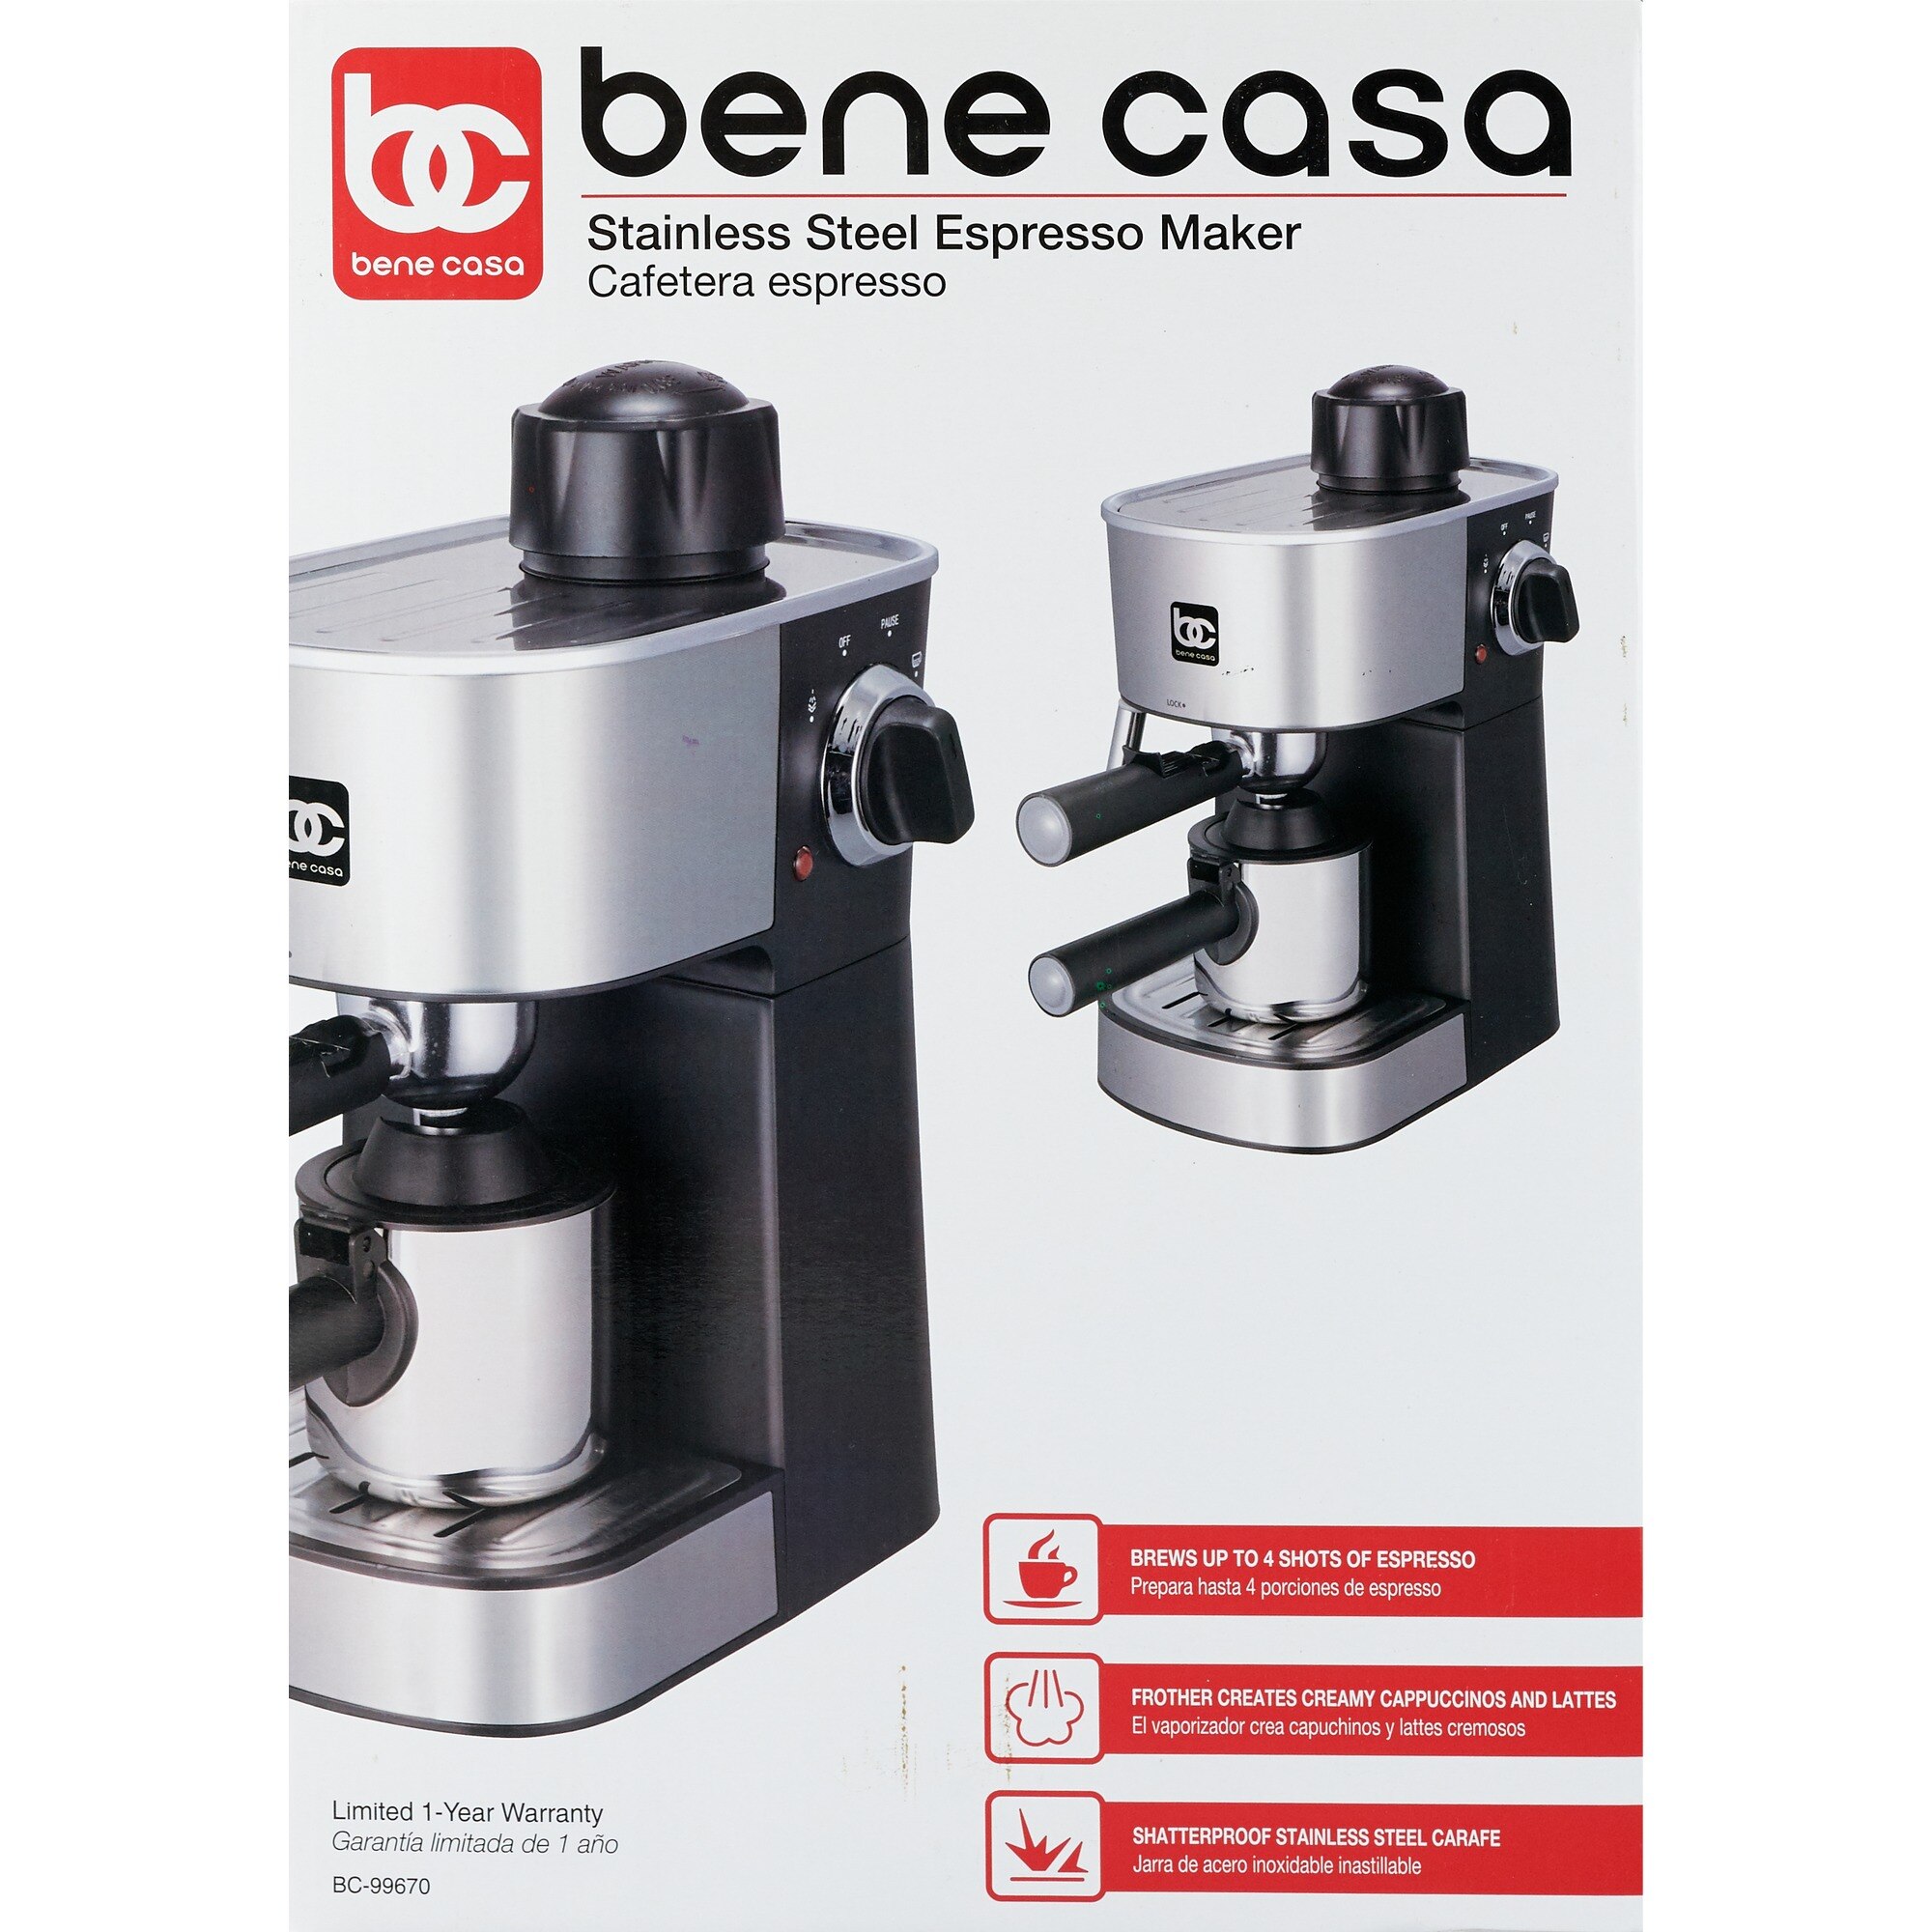 Bene Casa Espresso Maker with Stainless Steel Carafe, Stainless Steel & Black, 4 CUP